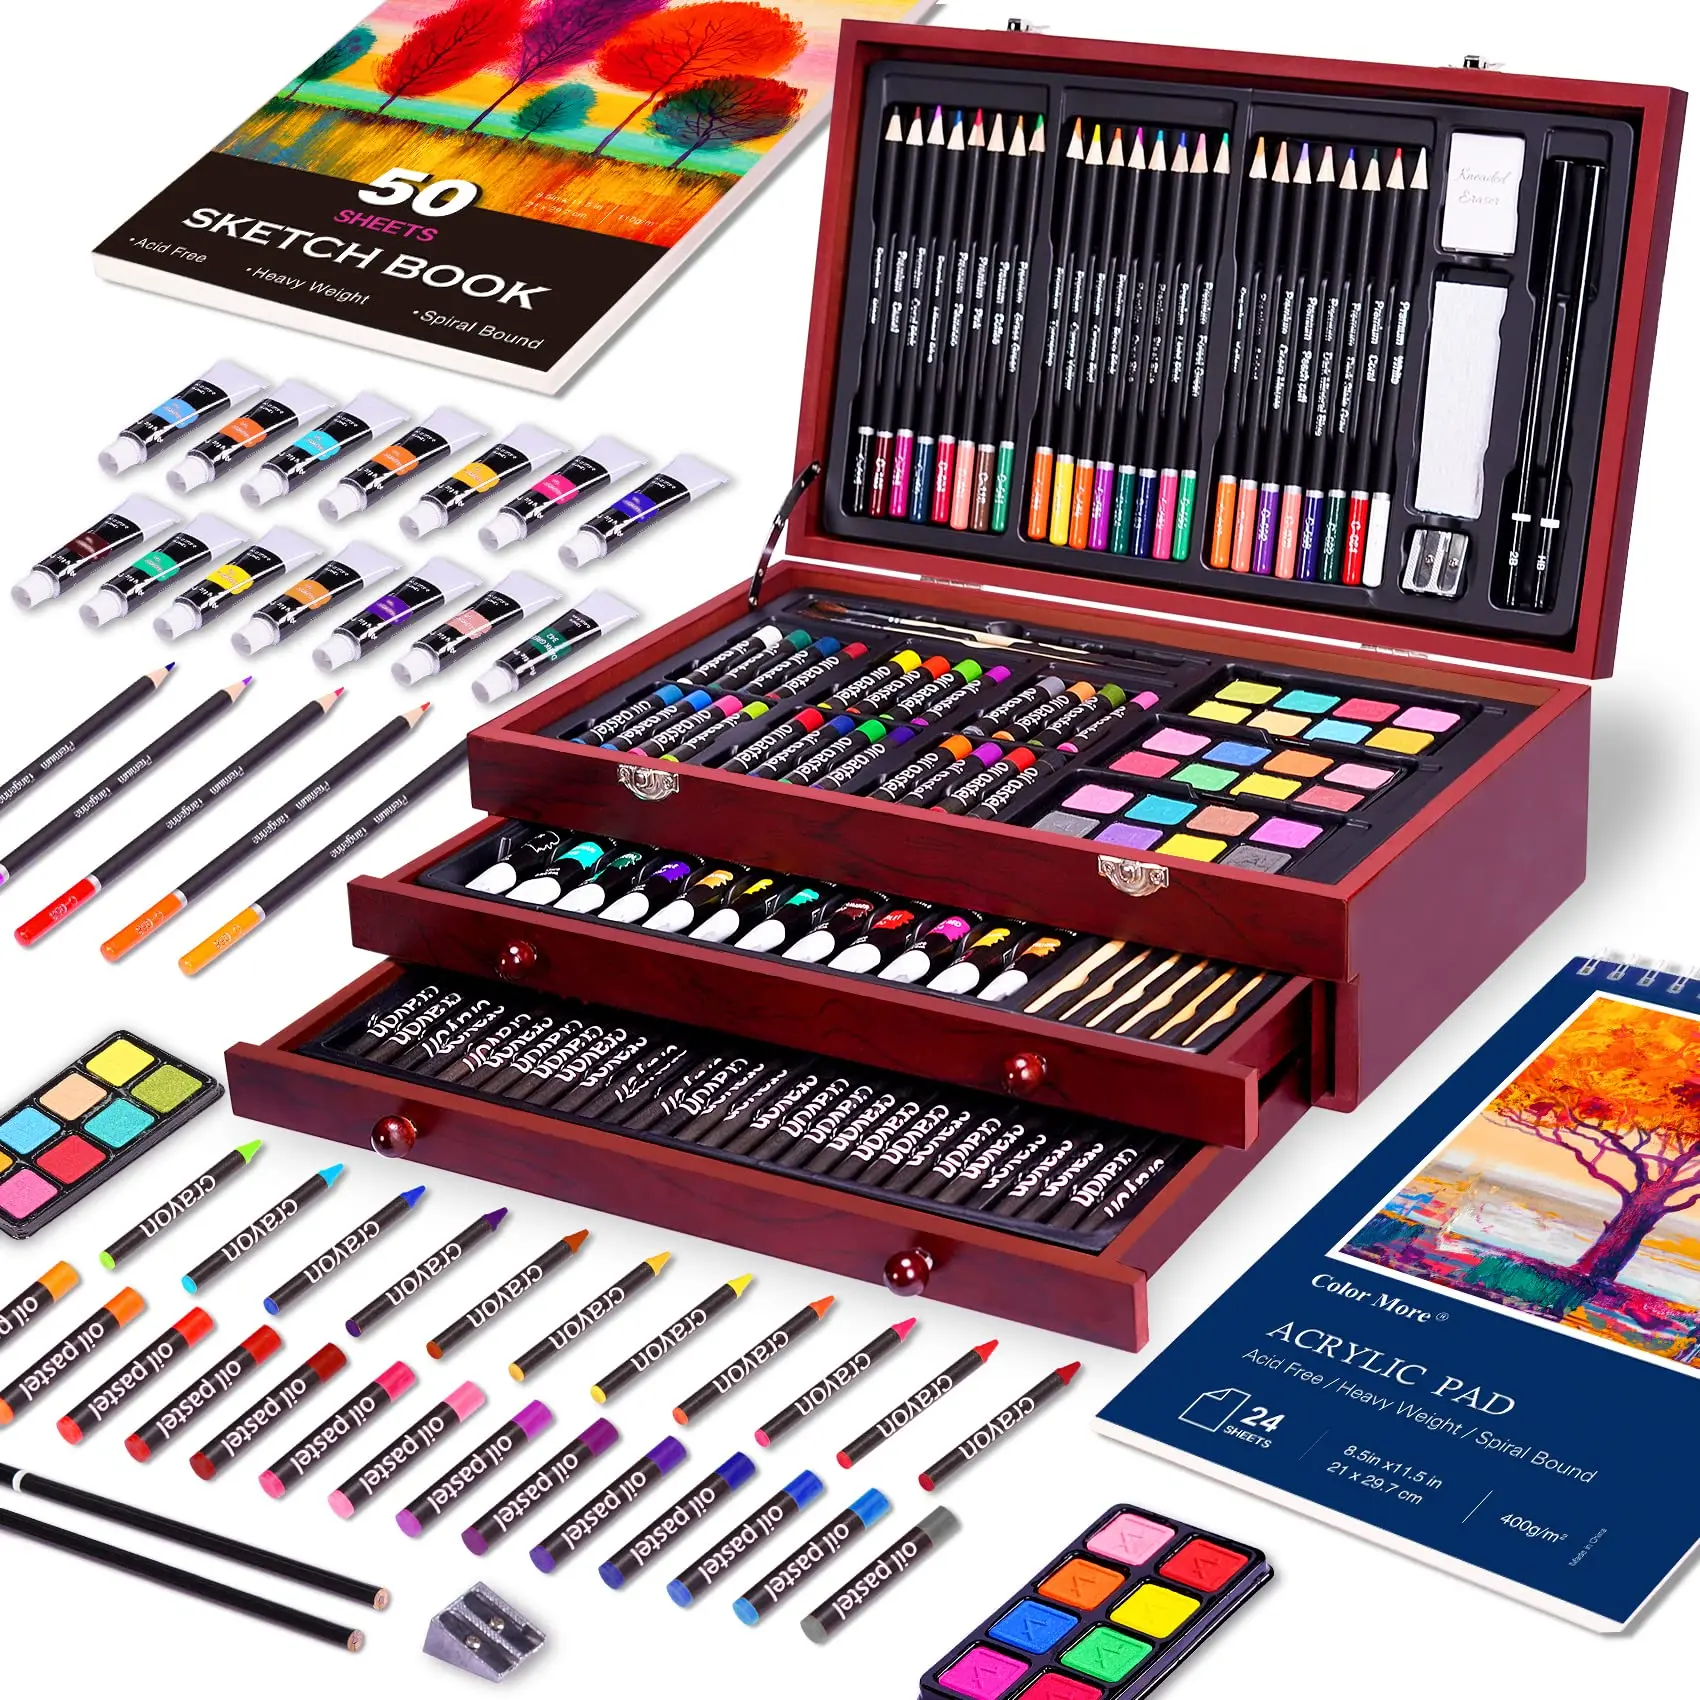 175 Pcs Deluxe Art Set With Acrylic Paints Crayons Colored Pencils ...